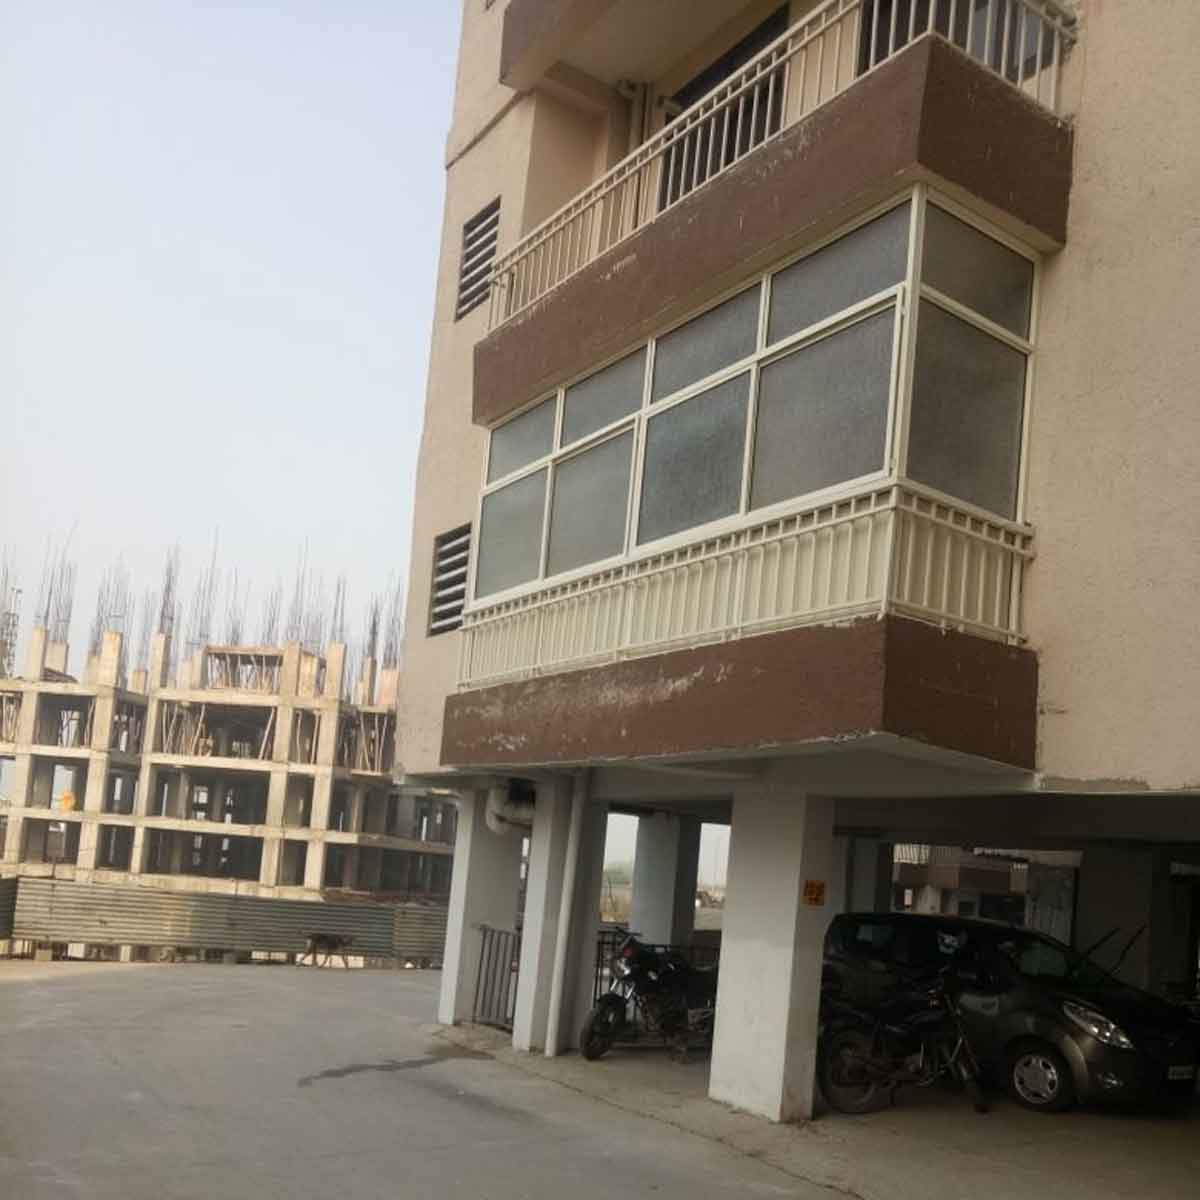 UPVC Aluminium Balcony Covering Manufacturers, Suppliers in Ghazipur